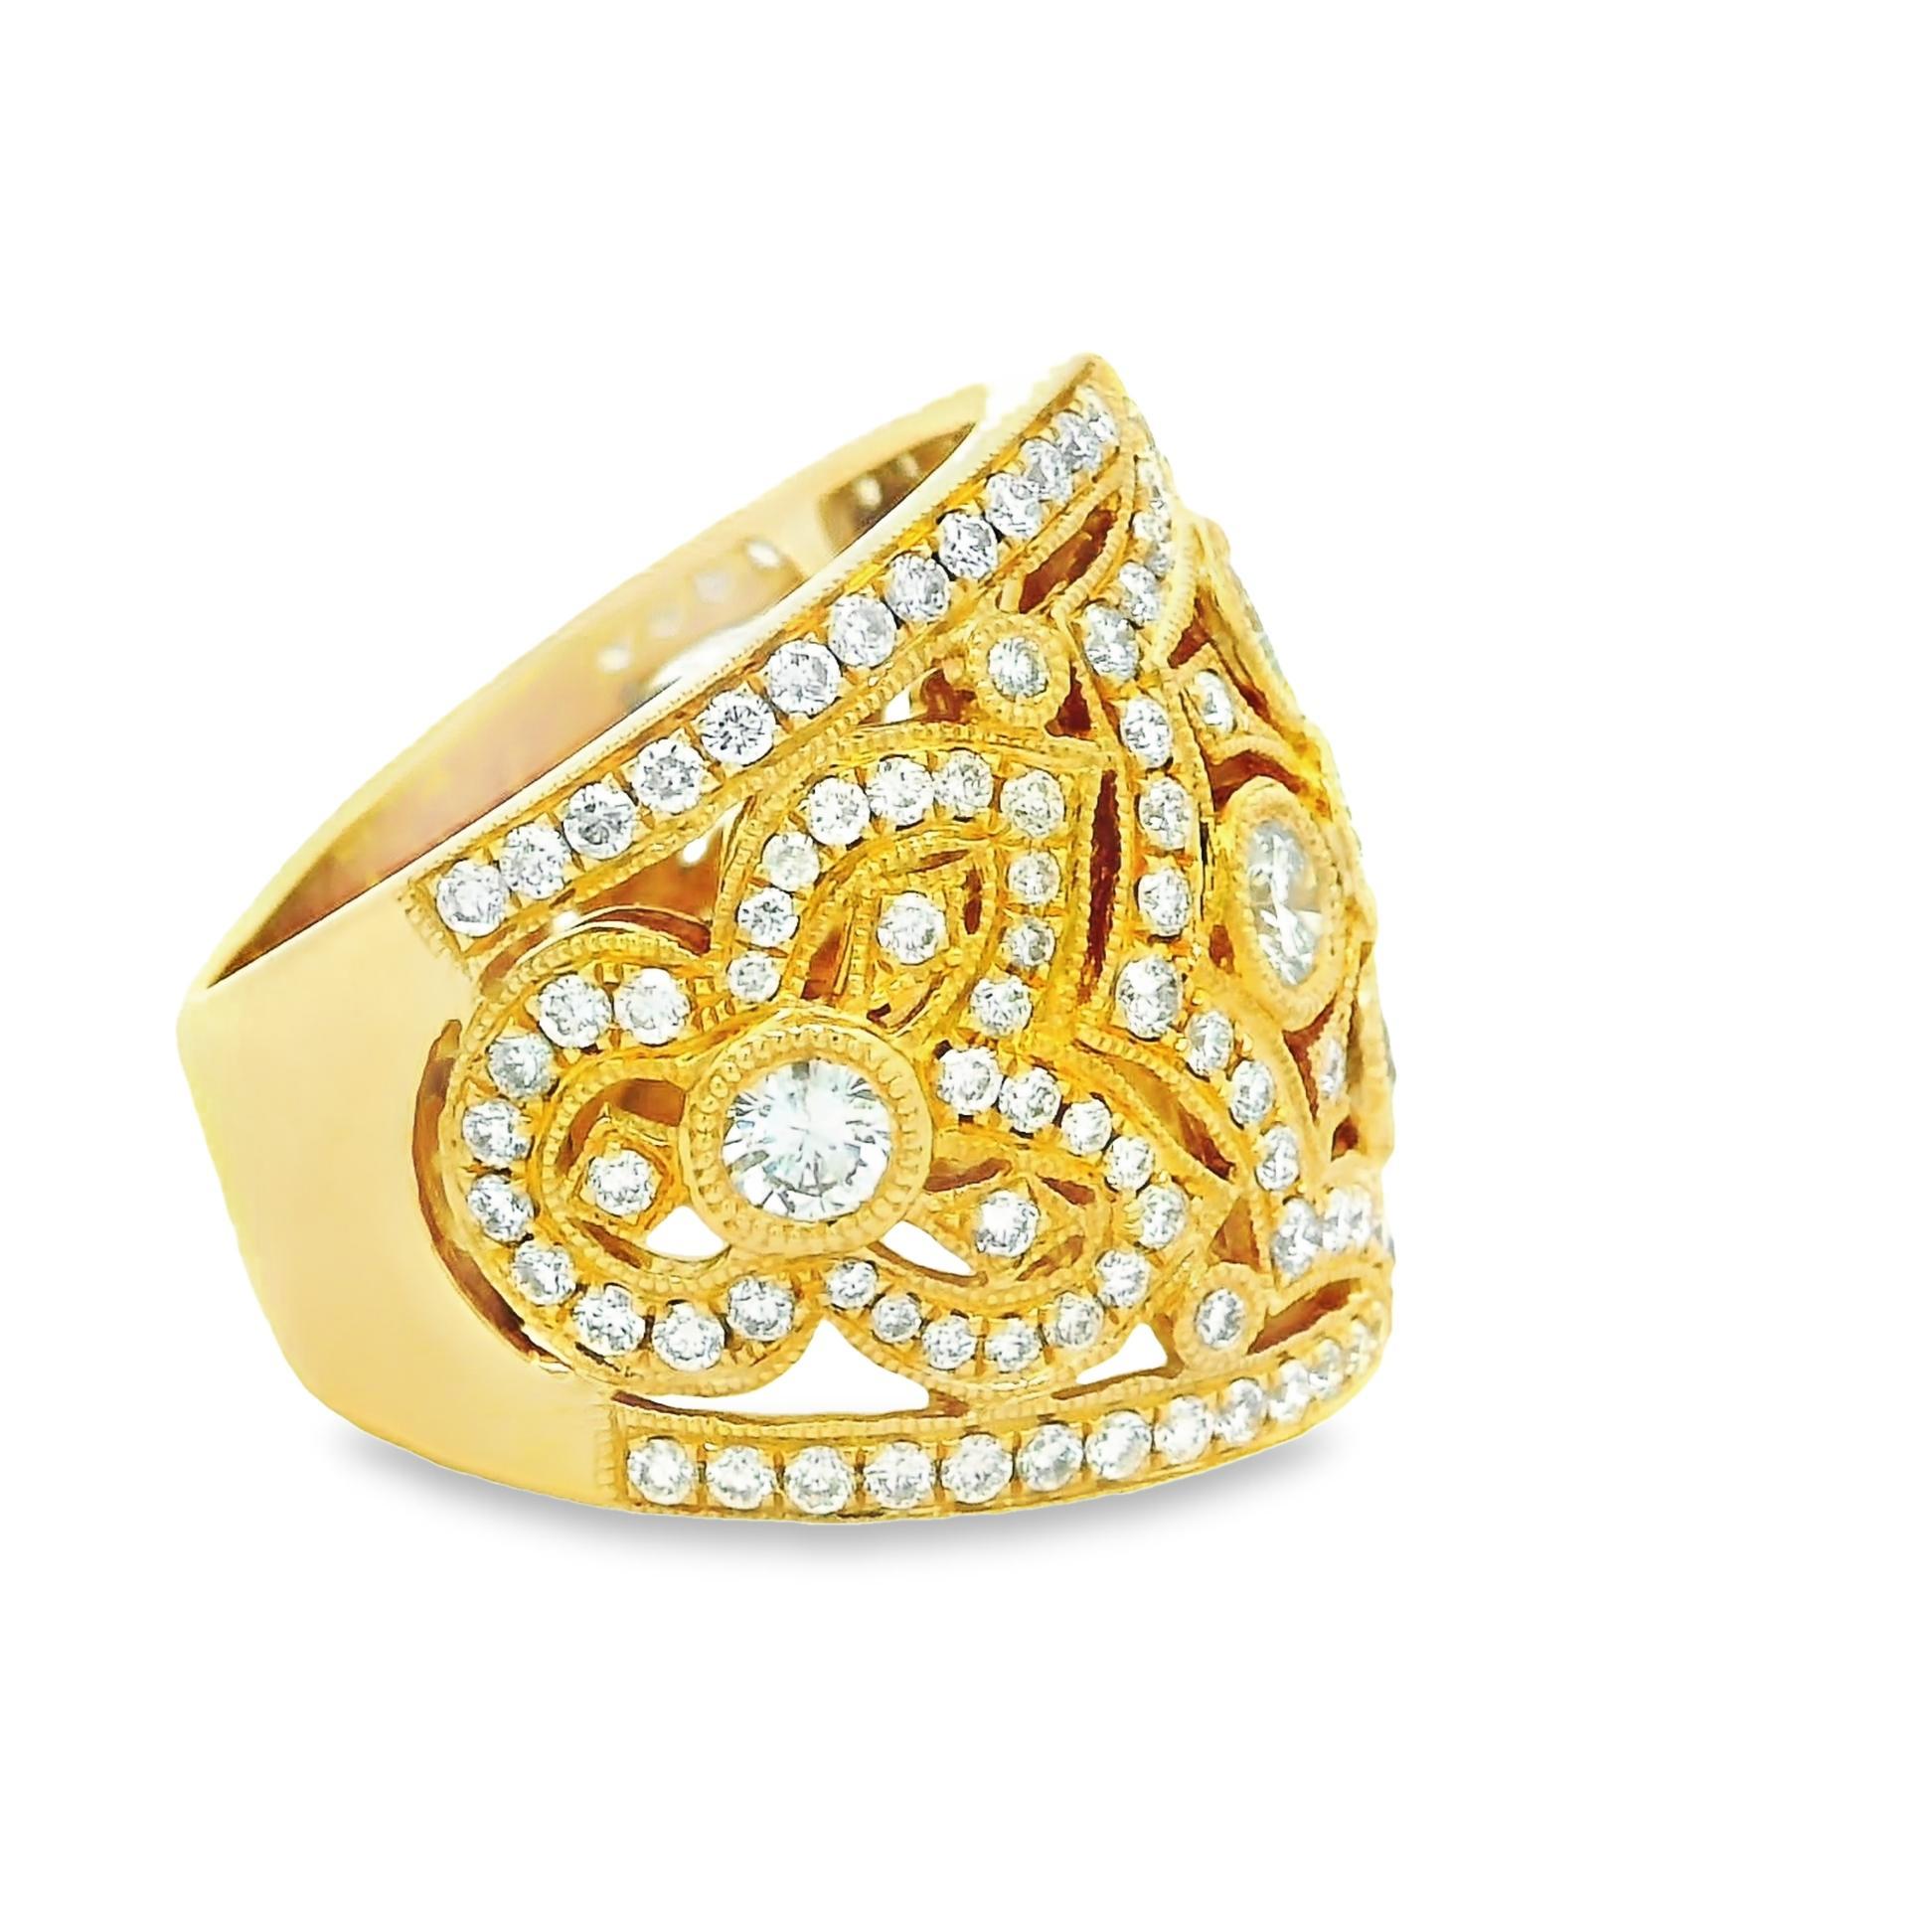 This beautiful band ring will mesmerize your eyes with its lovely antique design! Round brilliant-cut diamonds, totaling 2.23 carats, are placed around the piece in lines, curves, and geometric patterns in classic antique style. The diamonds are all